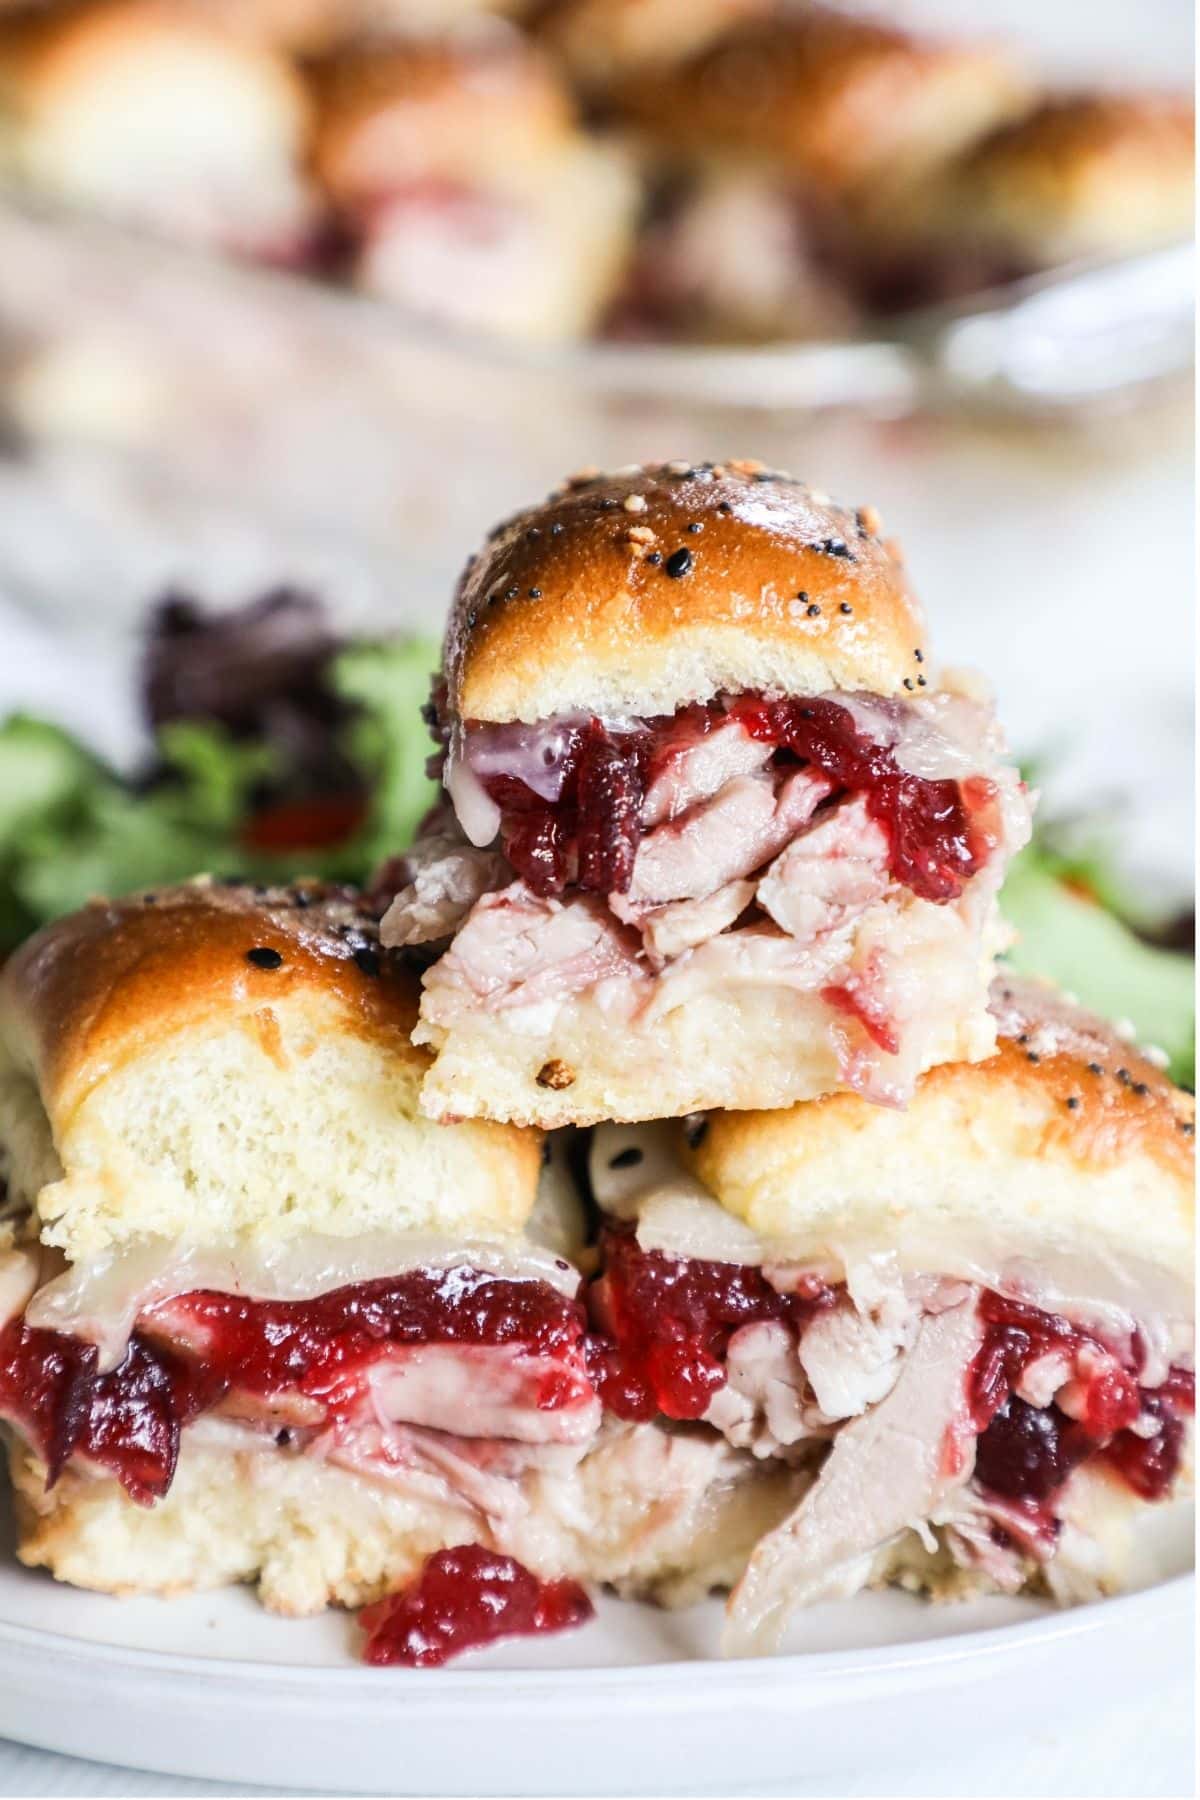 3 ham and cranberry sauce sliders on a plate